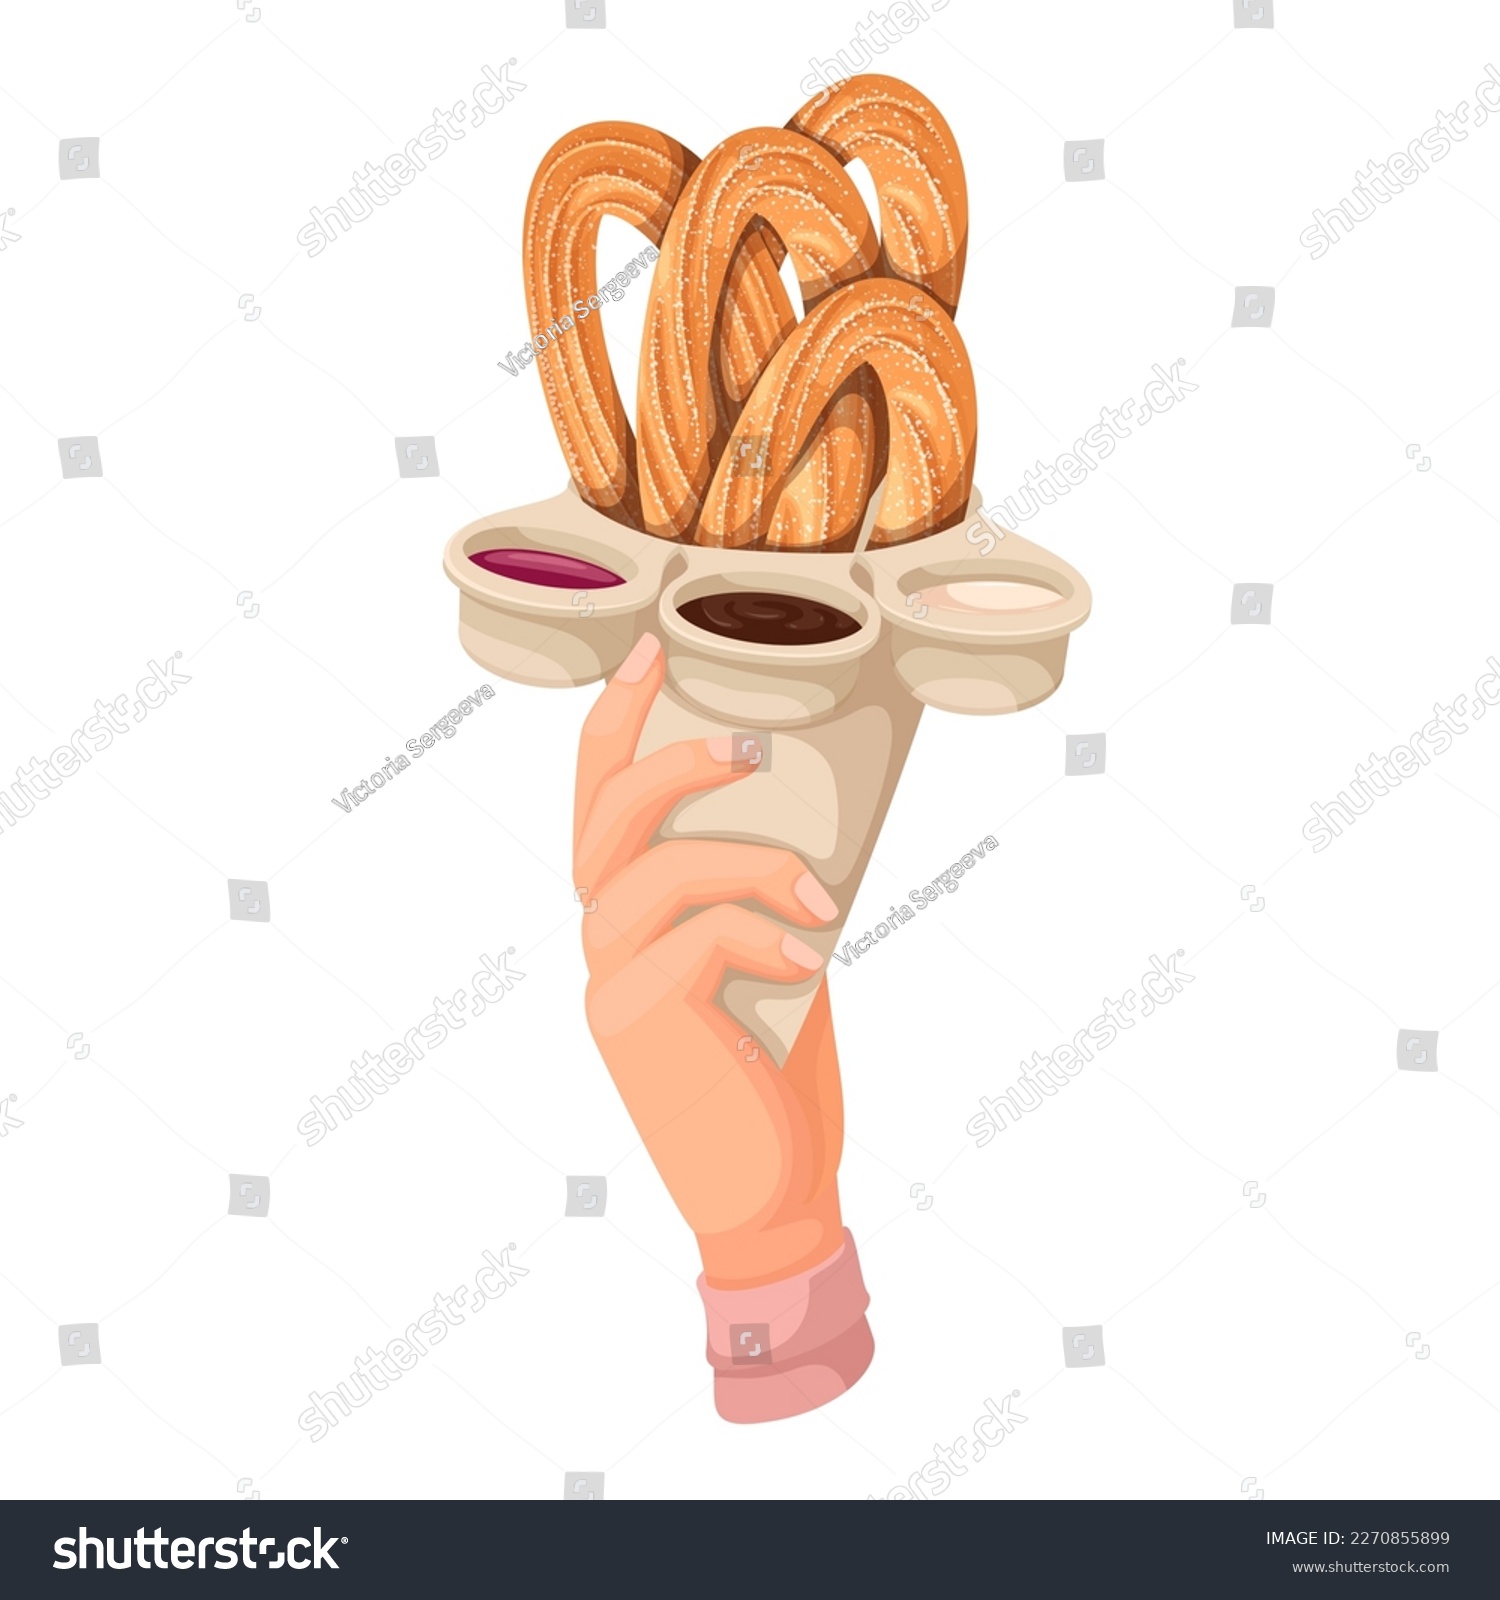 SVG of Hand holding churros in cone bag with different sauces vector illustration. Cartoon isolated hand of person eating dessert of street food restaurant menu, pile of churro sticks with sweet dips svg